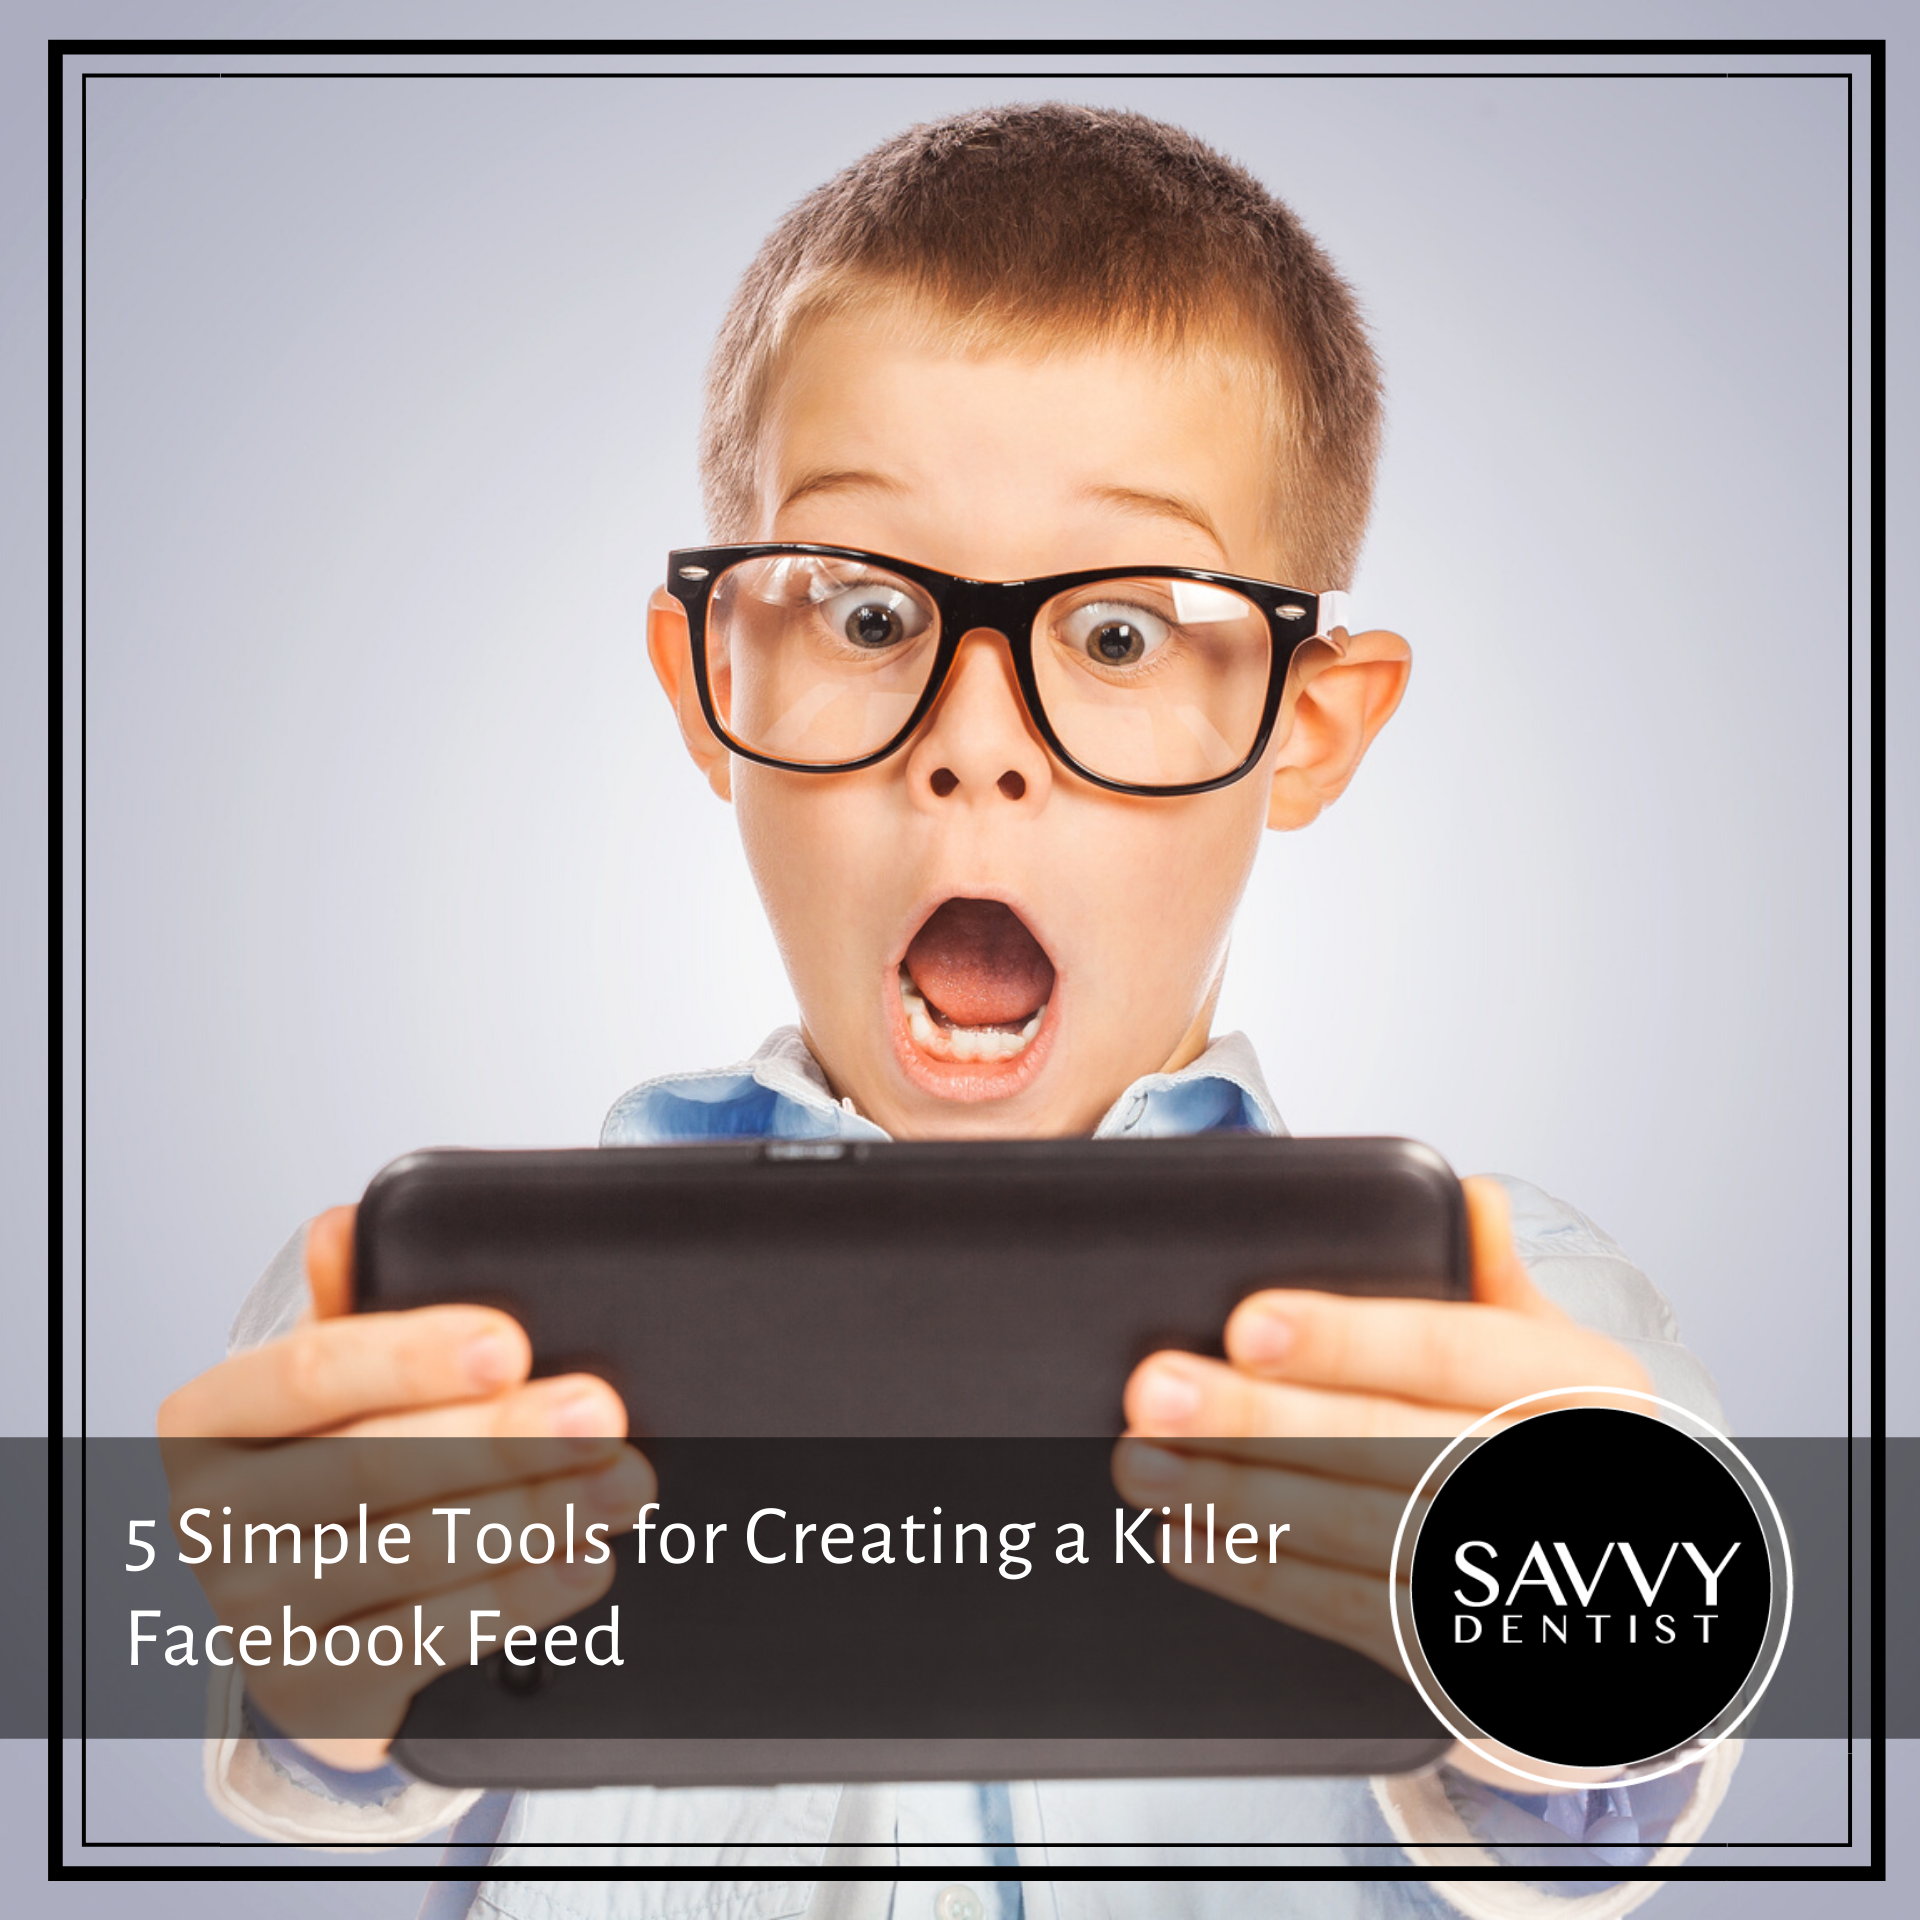 5 Simple Tools for Creating a Killer Facebook Feed